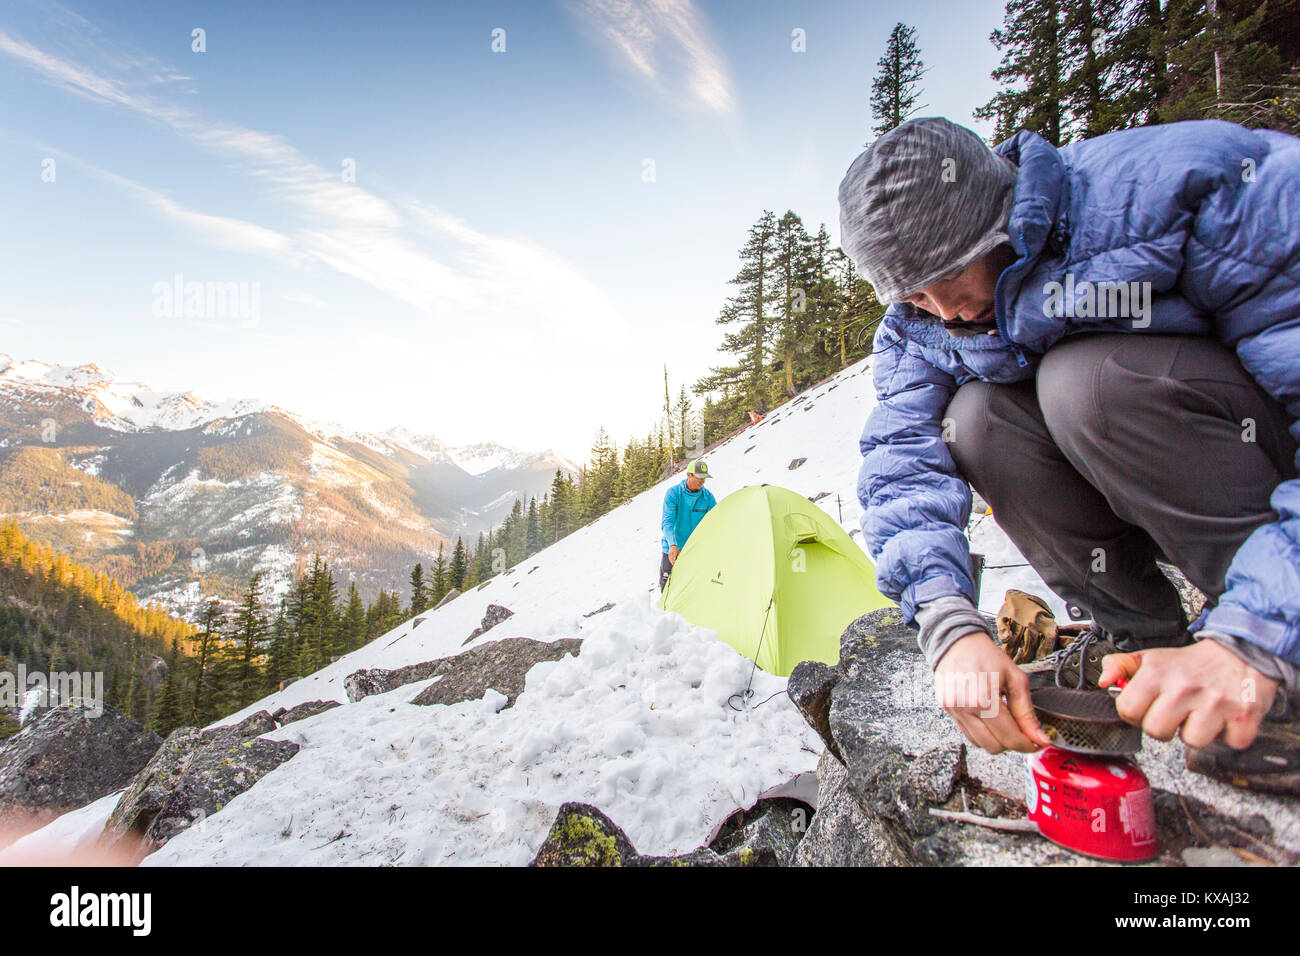 Woman crouching on snowy slope and lighting portable stove in front of man pitching tent, Leavenworth, Washington, USA Stock Photo